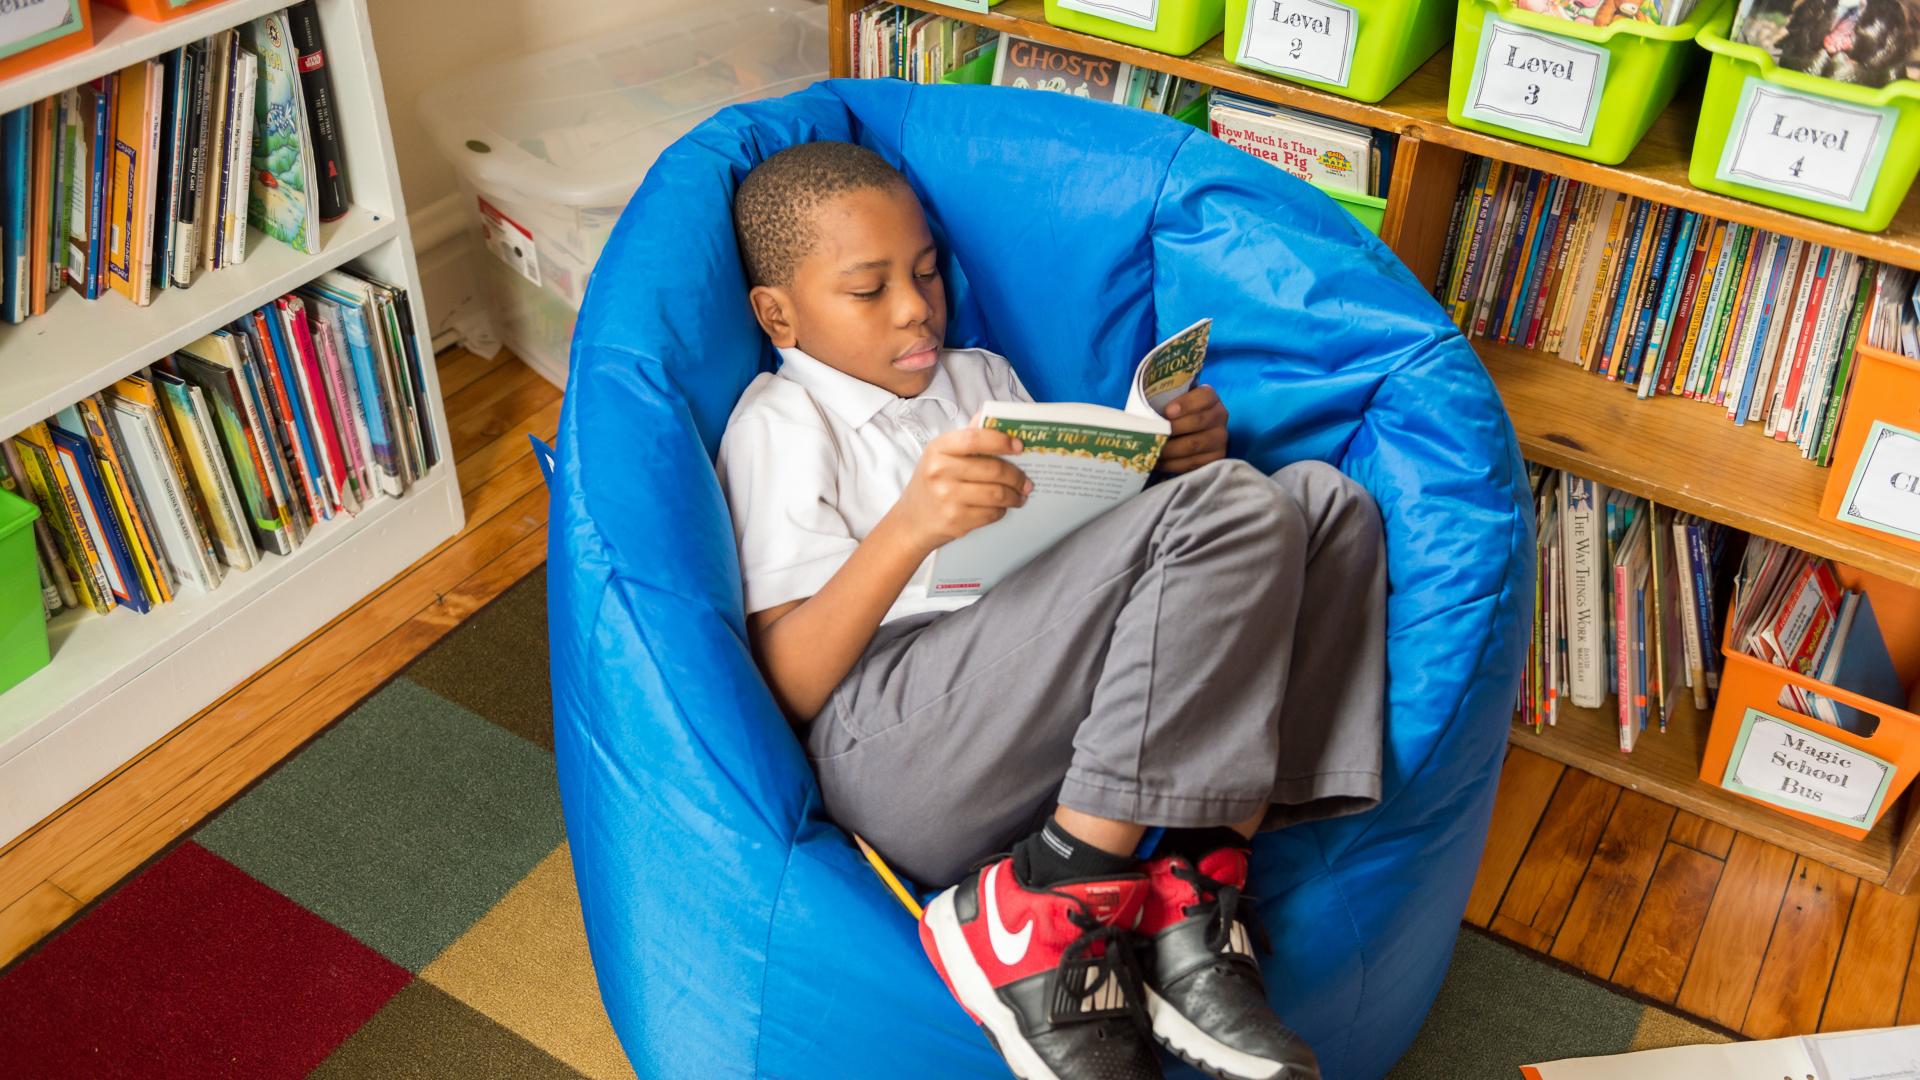 Student reading in nook